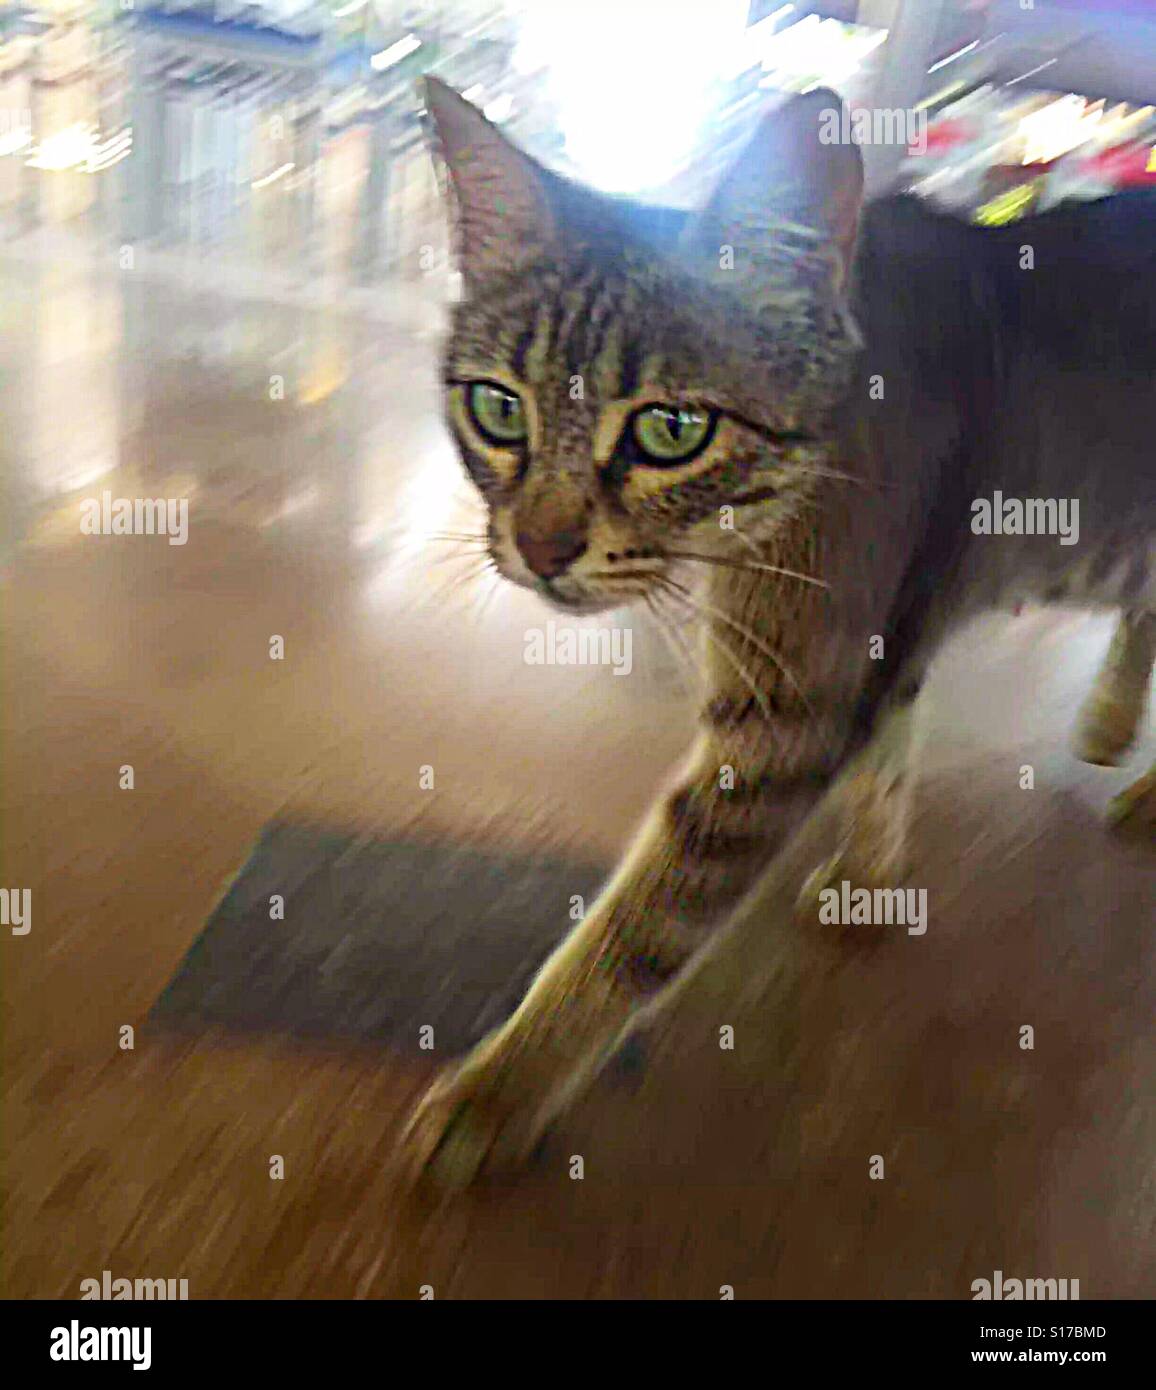 ...cat in a hurry...! Stock Photo